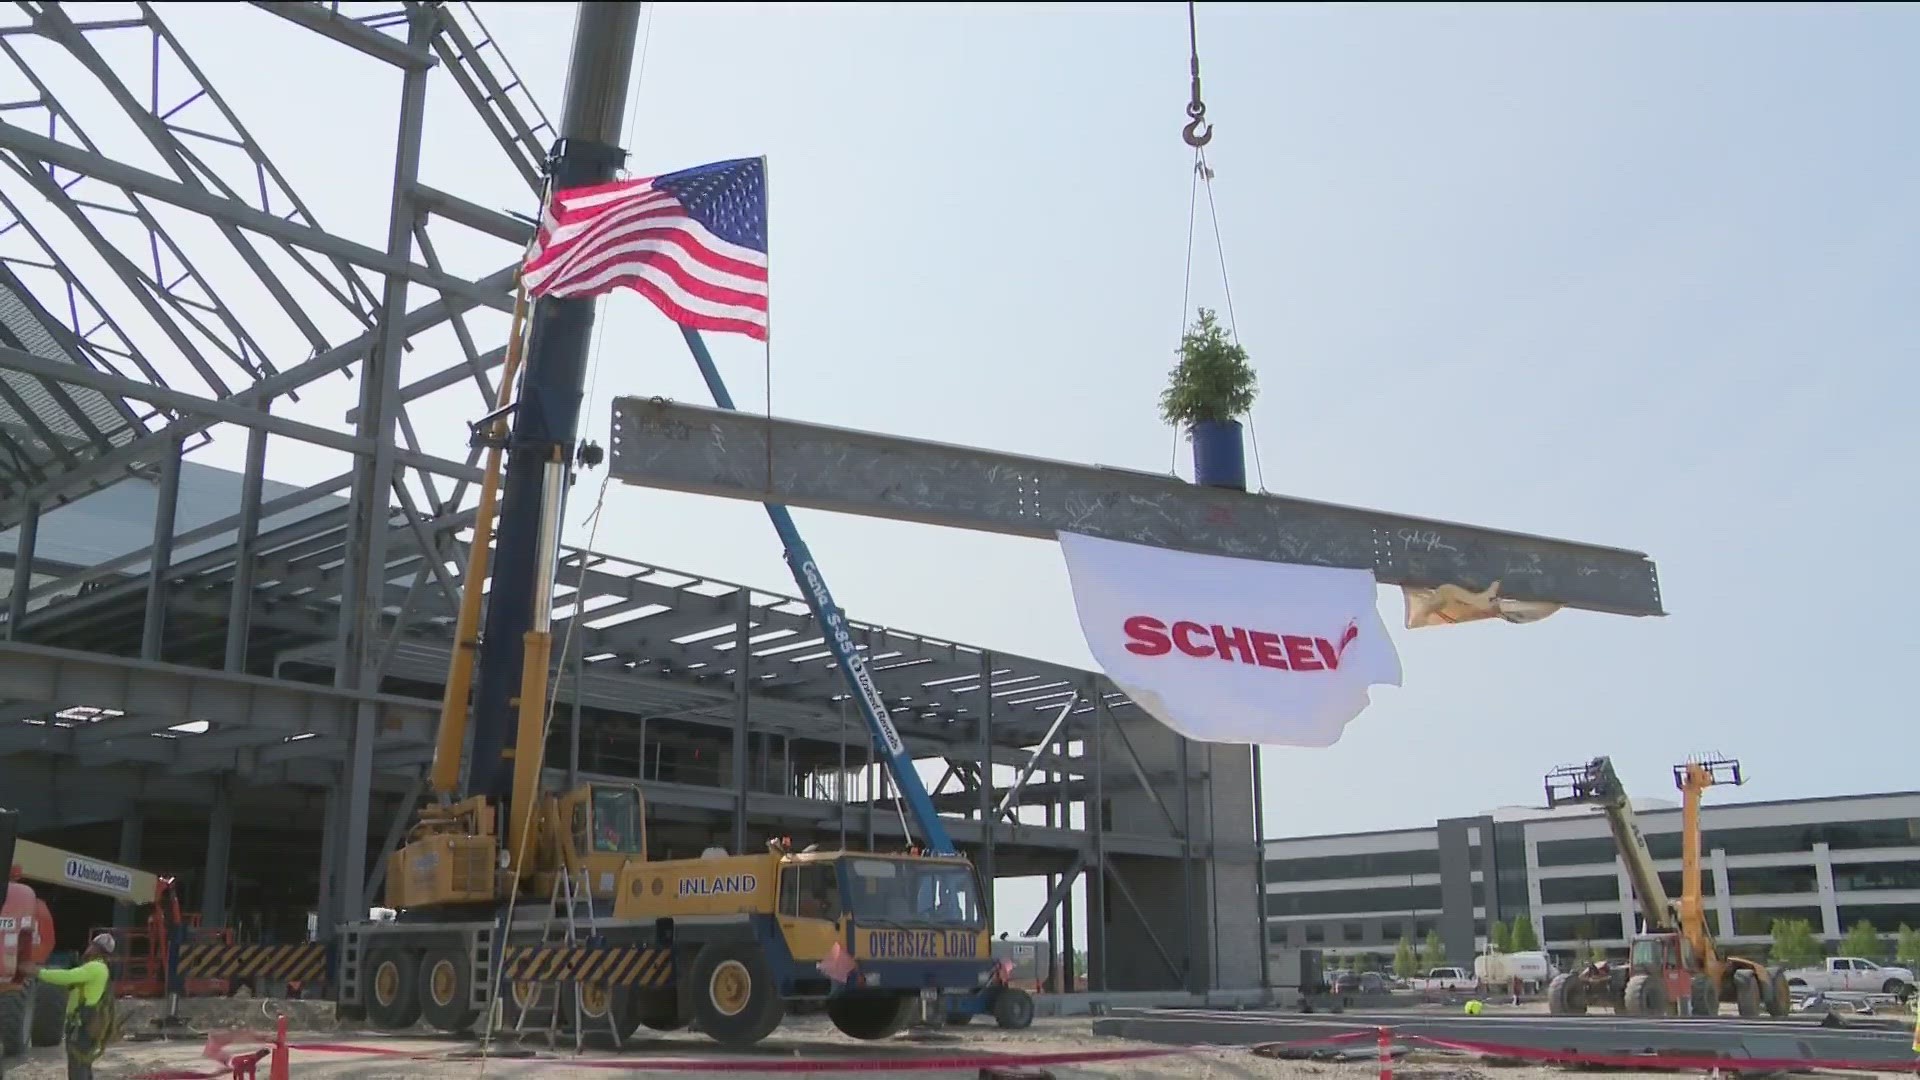 The retailer is opening Idaho's first SCHEELS store in April of 2024 - on Thursday, the store development team installed the final 'building block' to the structure.